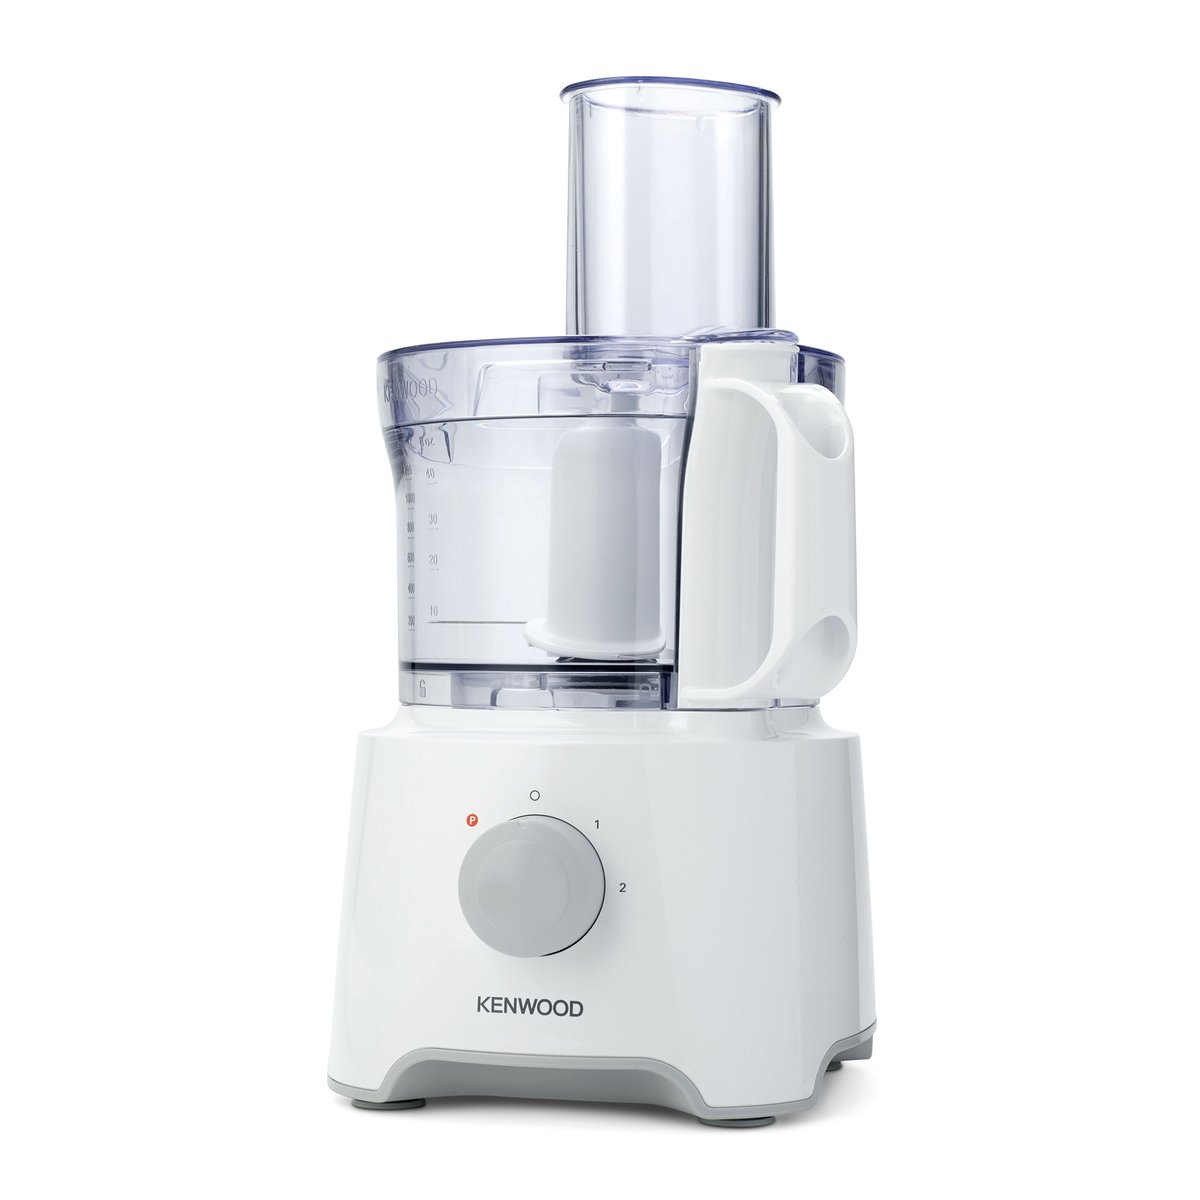 Kenwood Food Processor 800W Multi-Functional with Reversible Stainless Steel Disk, Blender, Whisk, Dough Maker, Citrus Juicer FDP303WH White